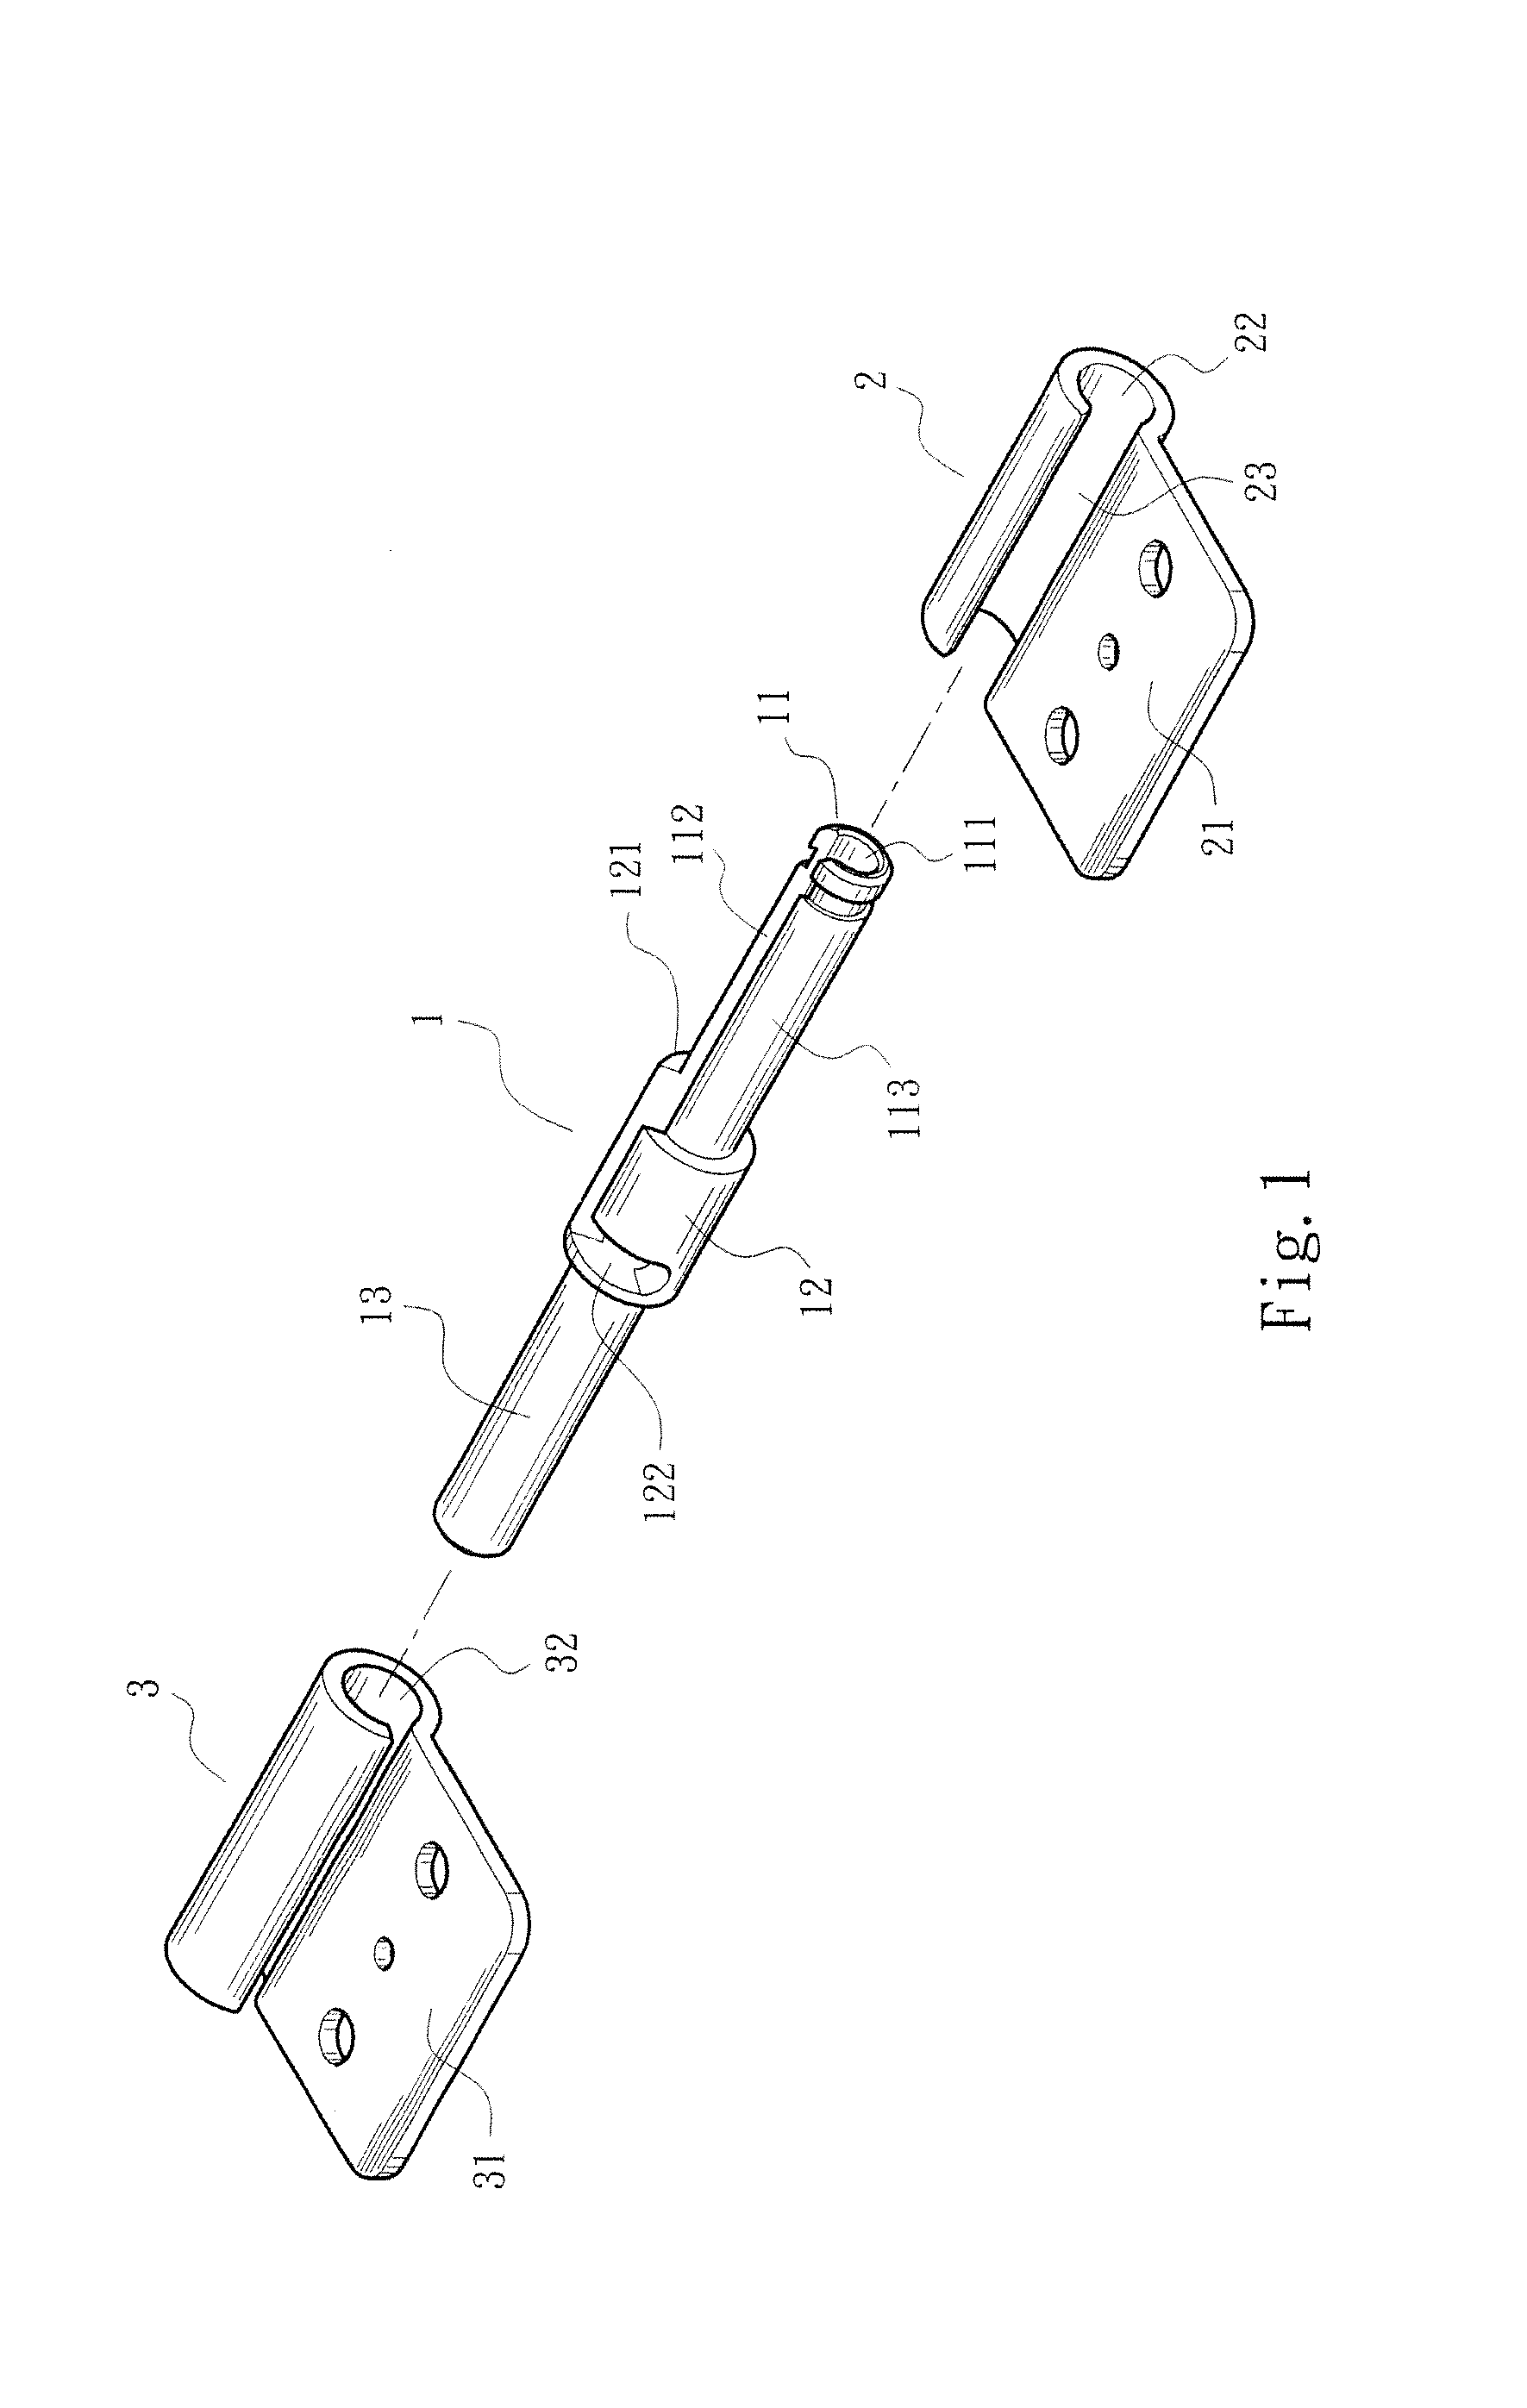 Rotary shaft wire passage structure